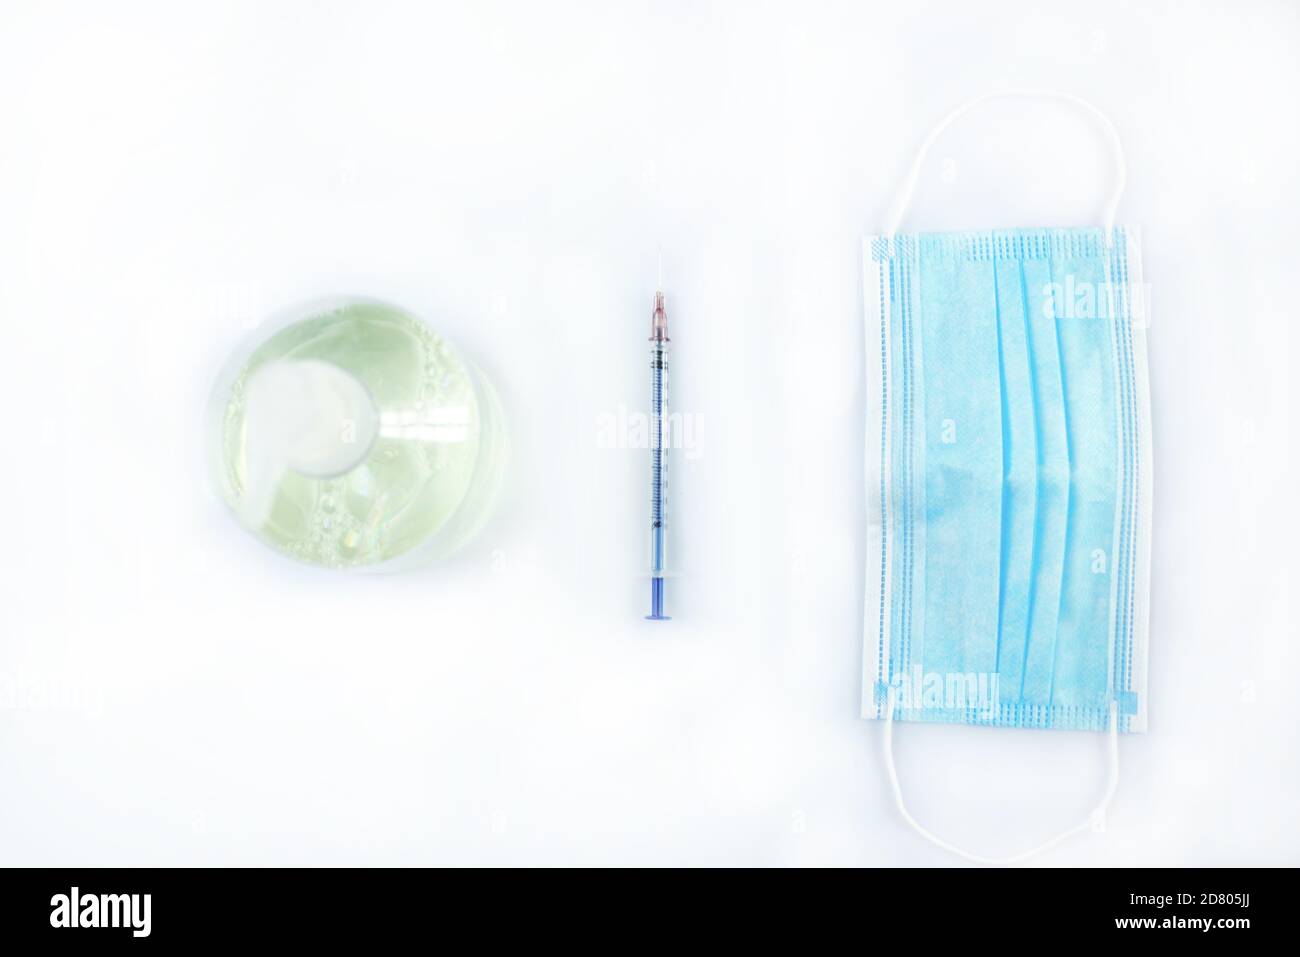 Medical masks, syringes and disinfectants are isolated on a white background Stock Photo